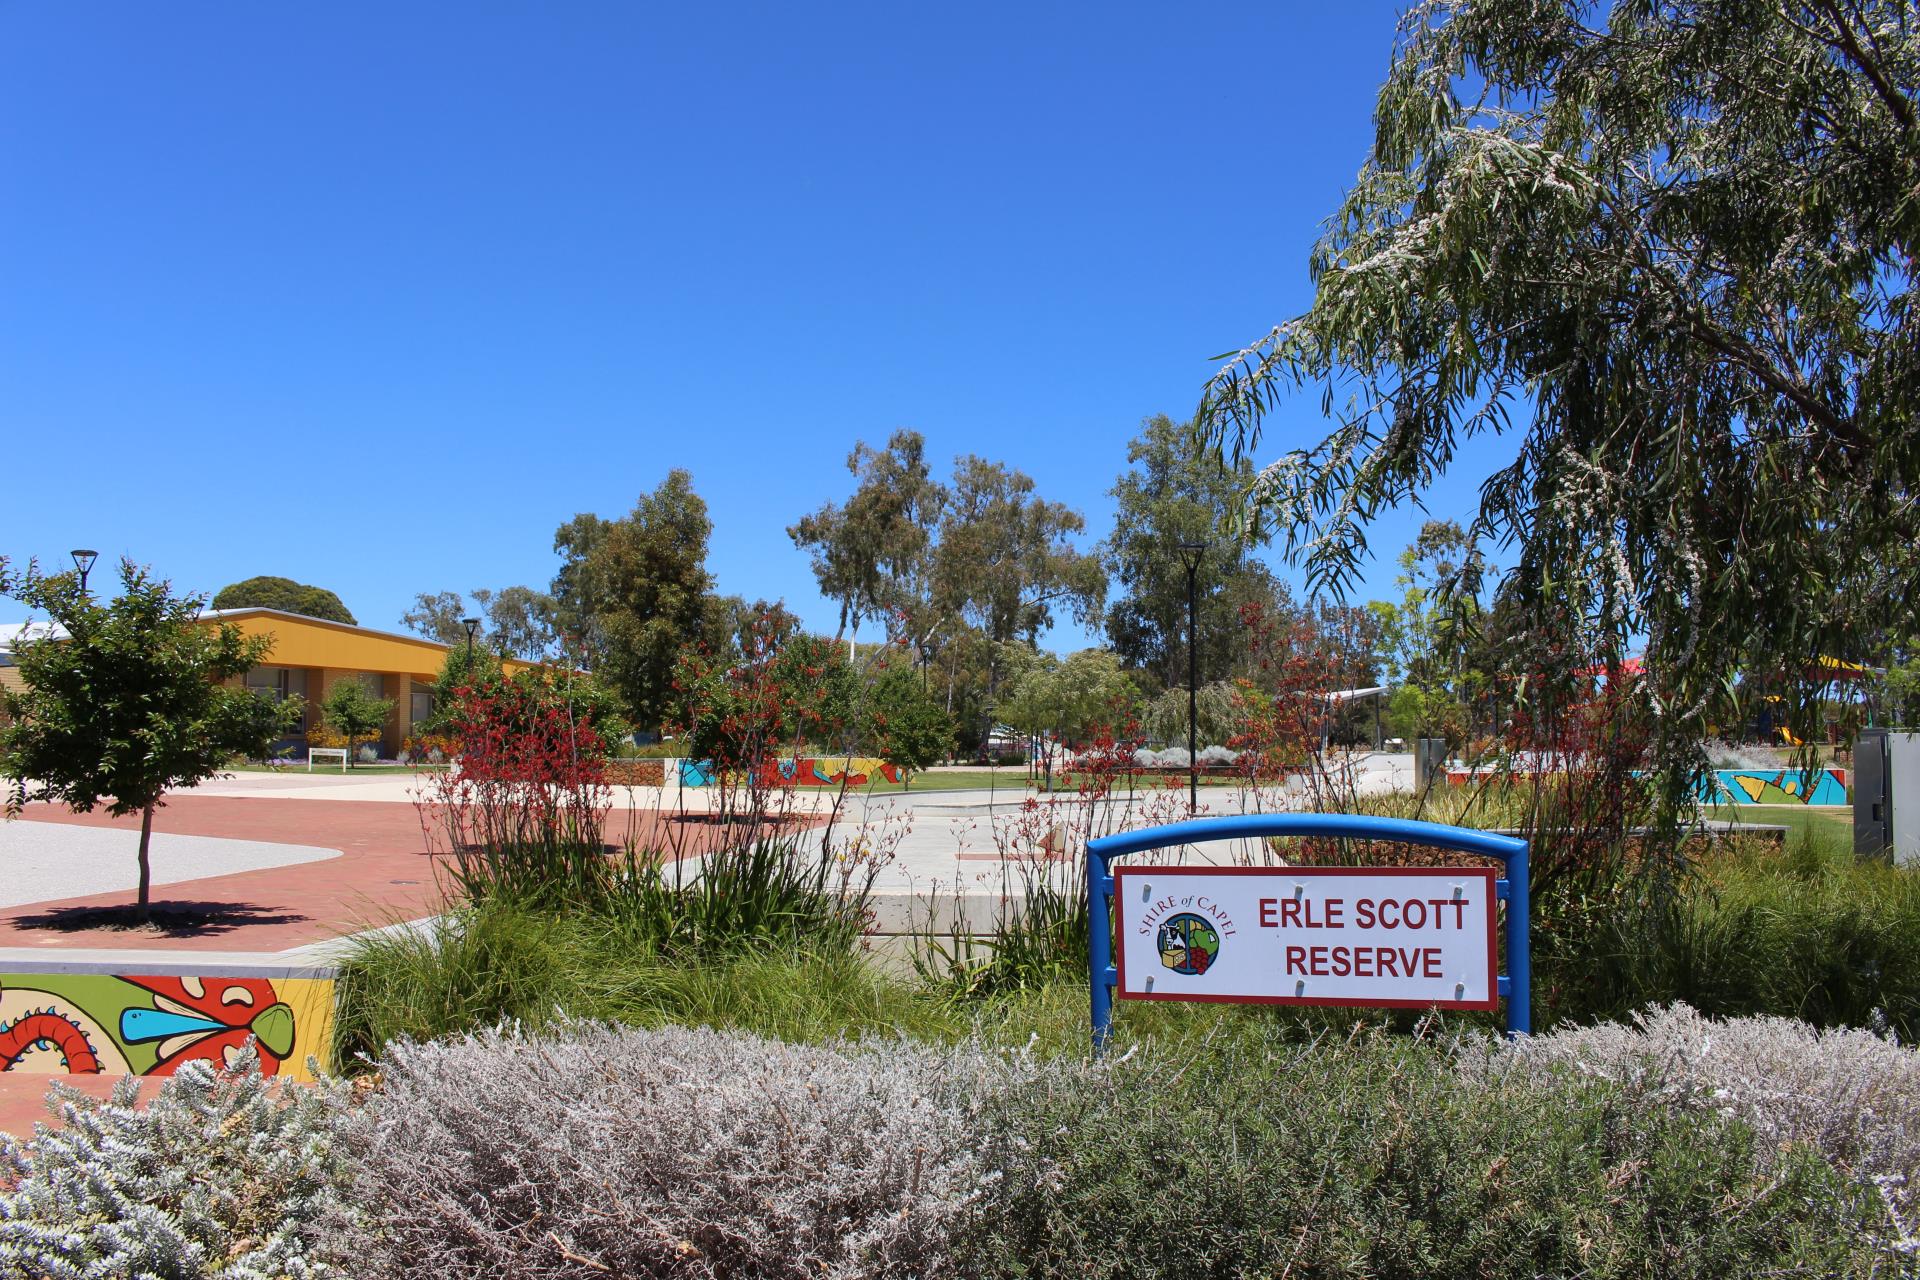 Erle Scott reserve sign at park in Capel